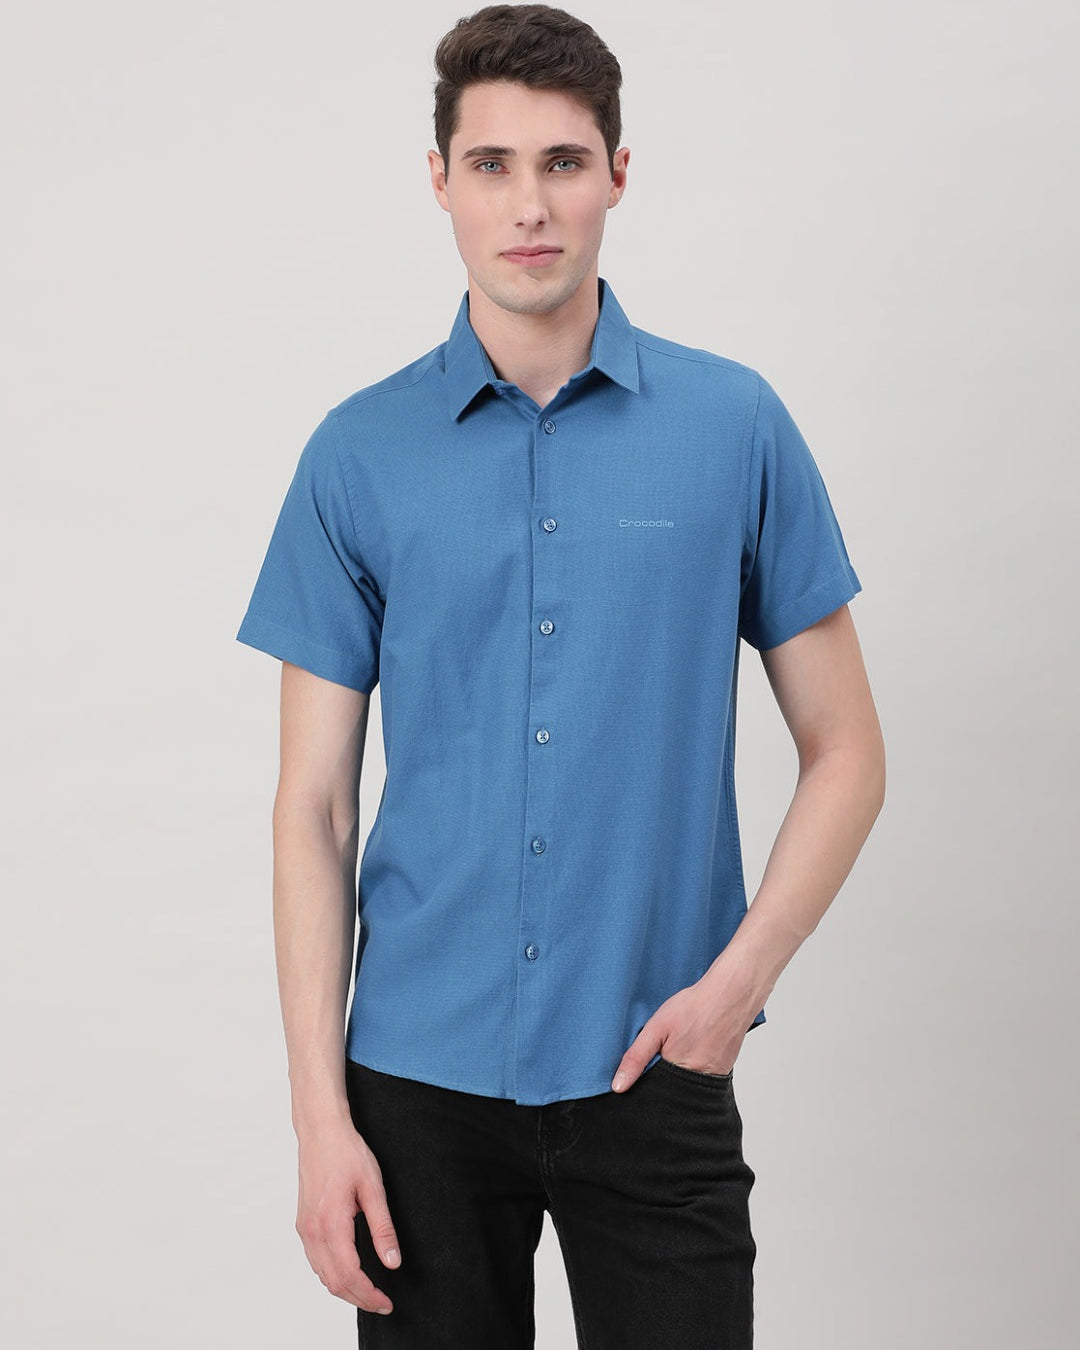 Casual Royal Blue Half Sleeve Comfort Fit Solid Shirt with Collar for Men